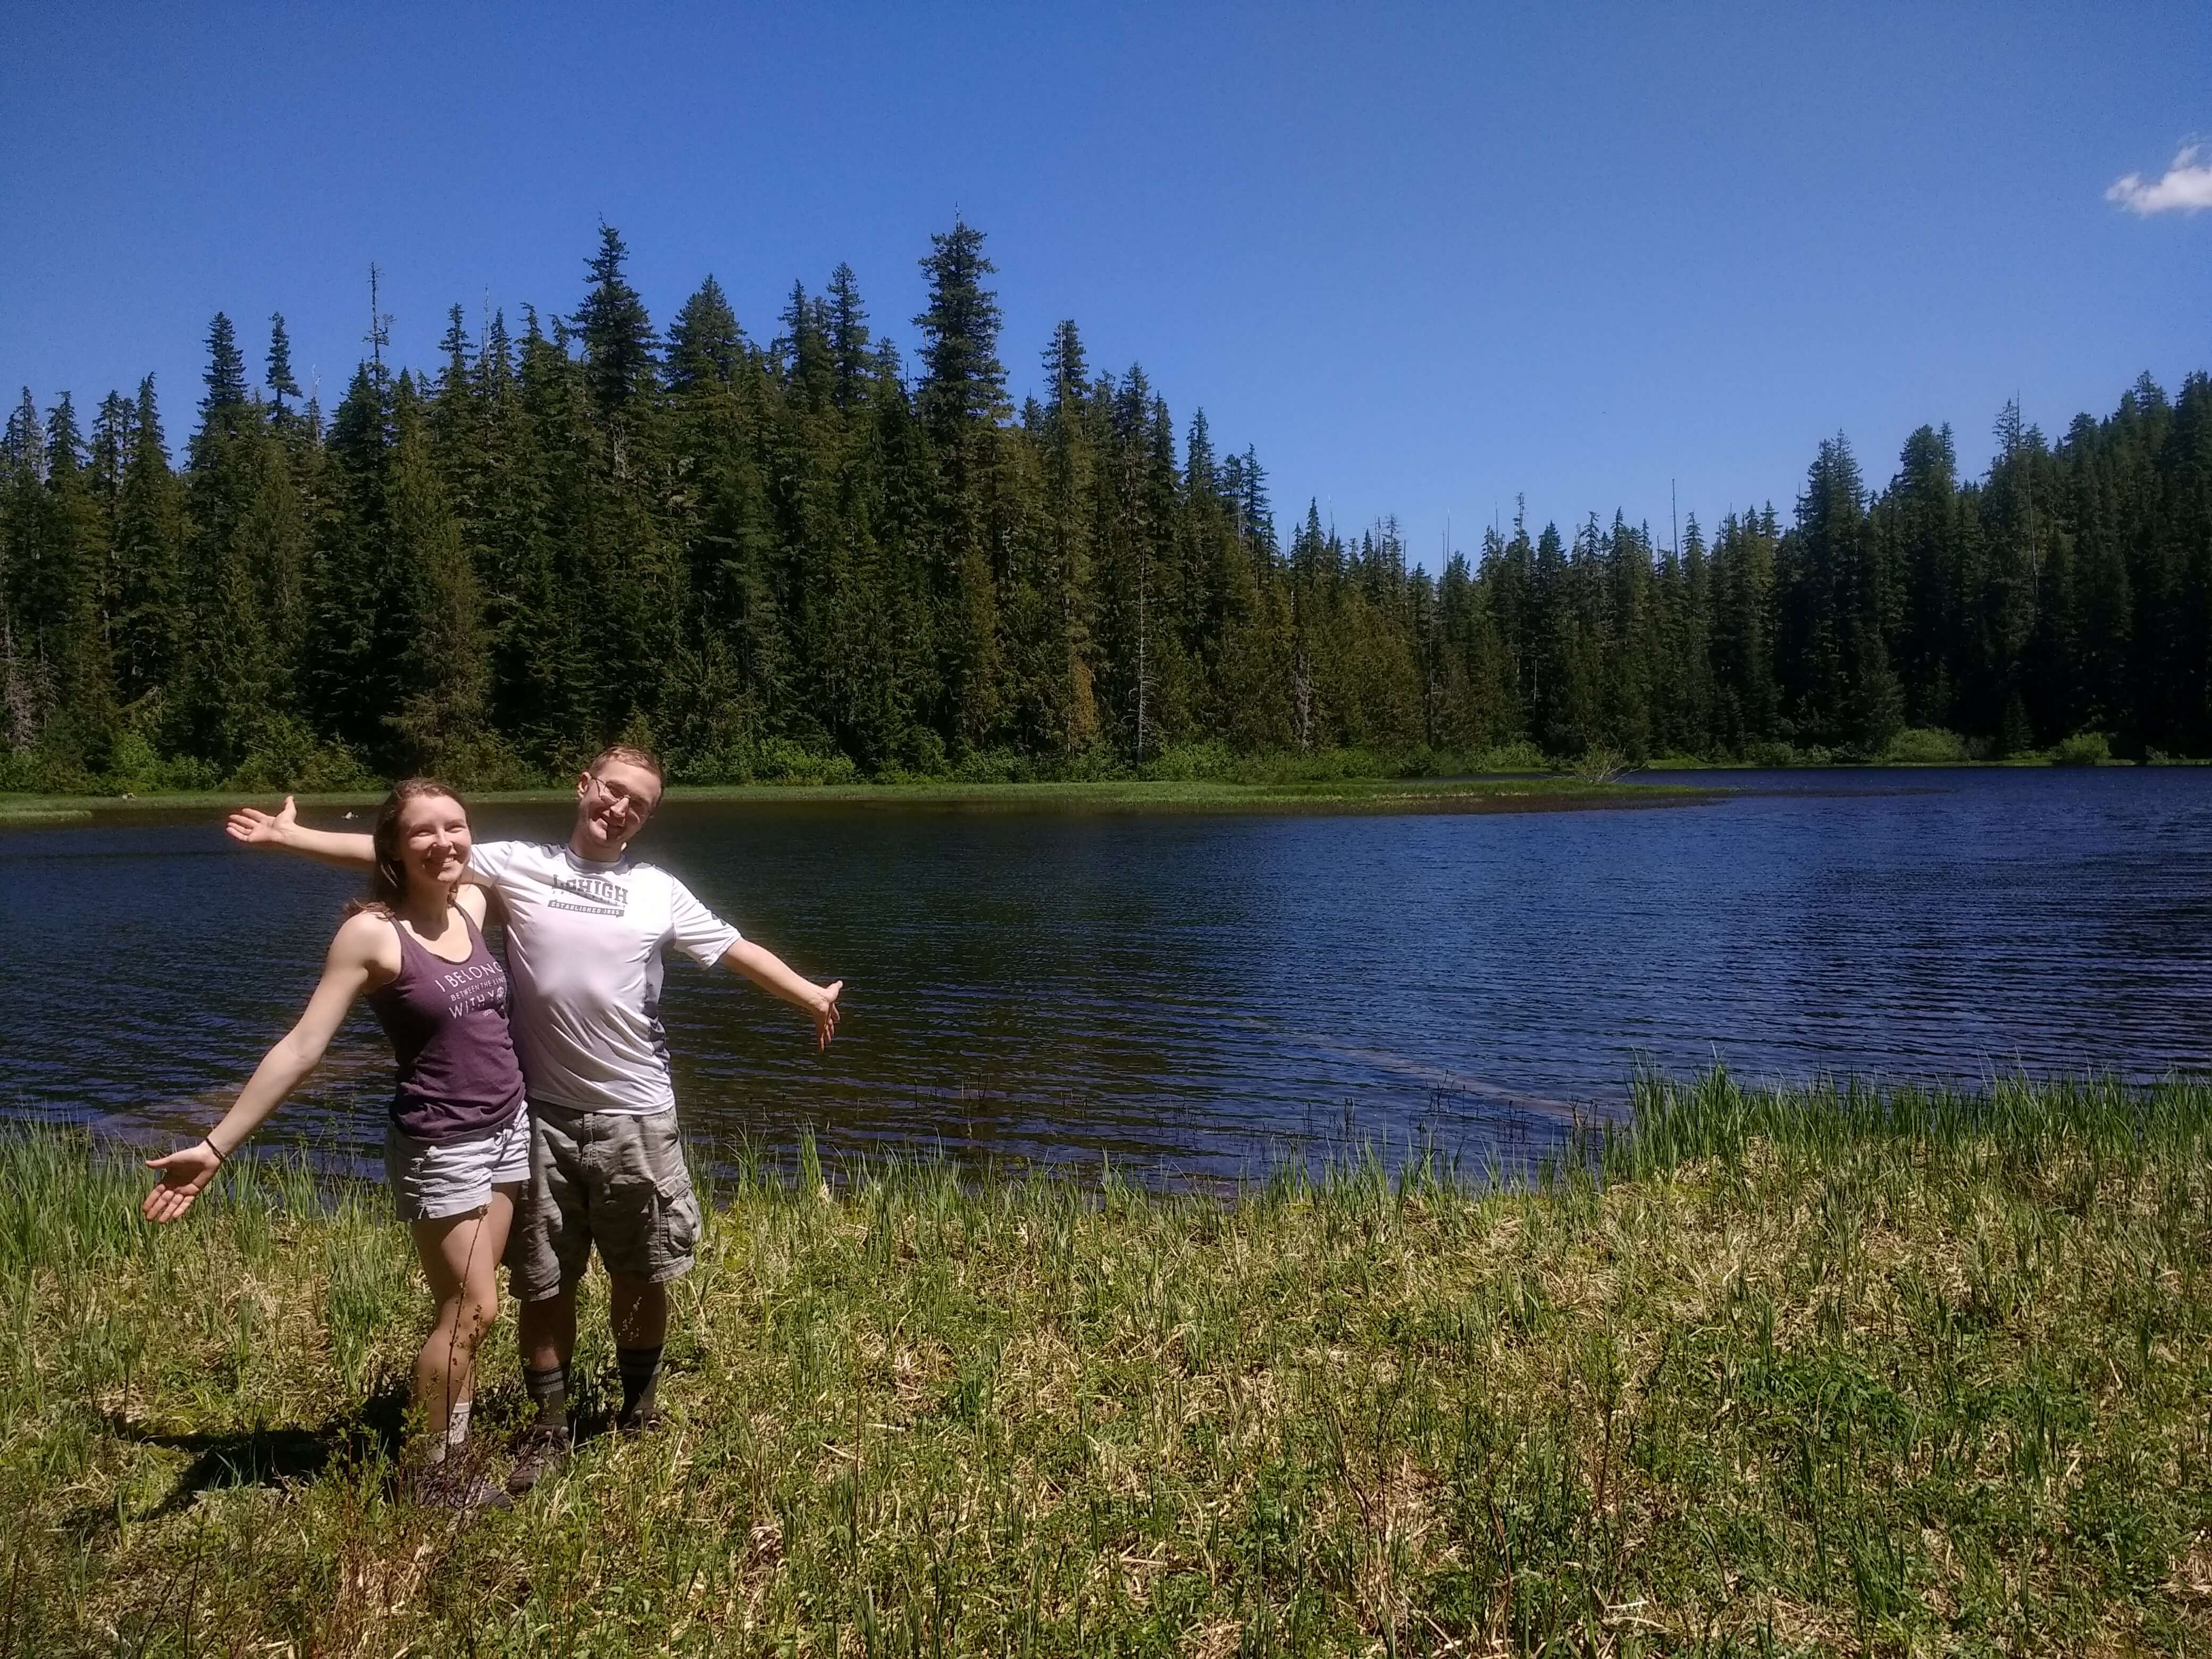 Hikers posing at Mink Lake in Olympic National Park